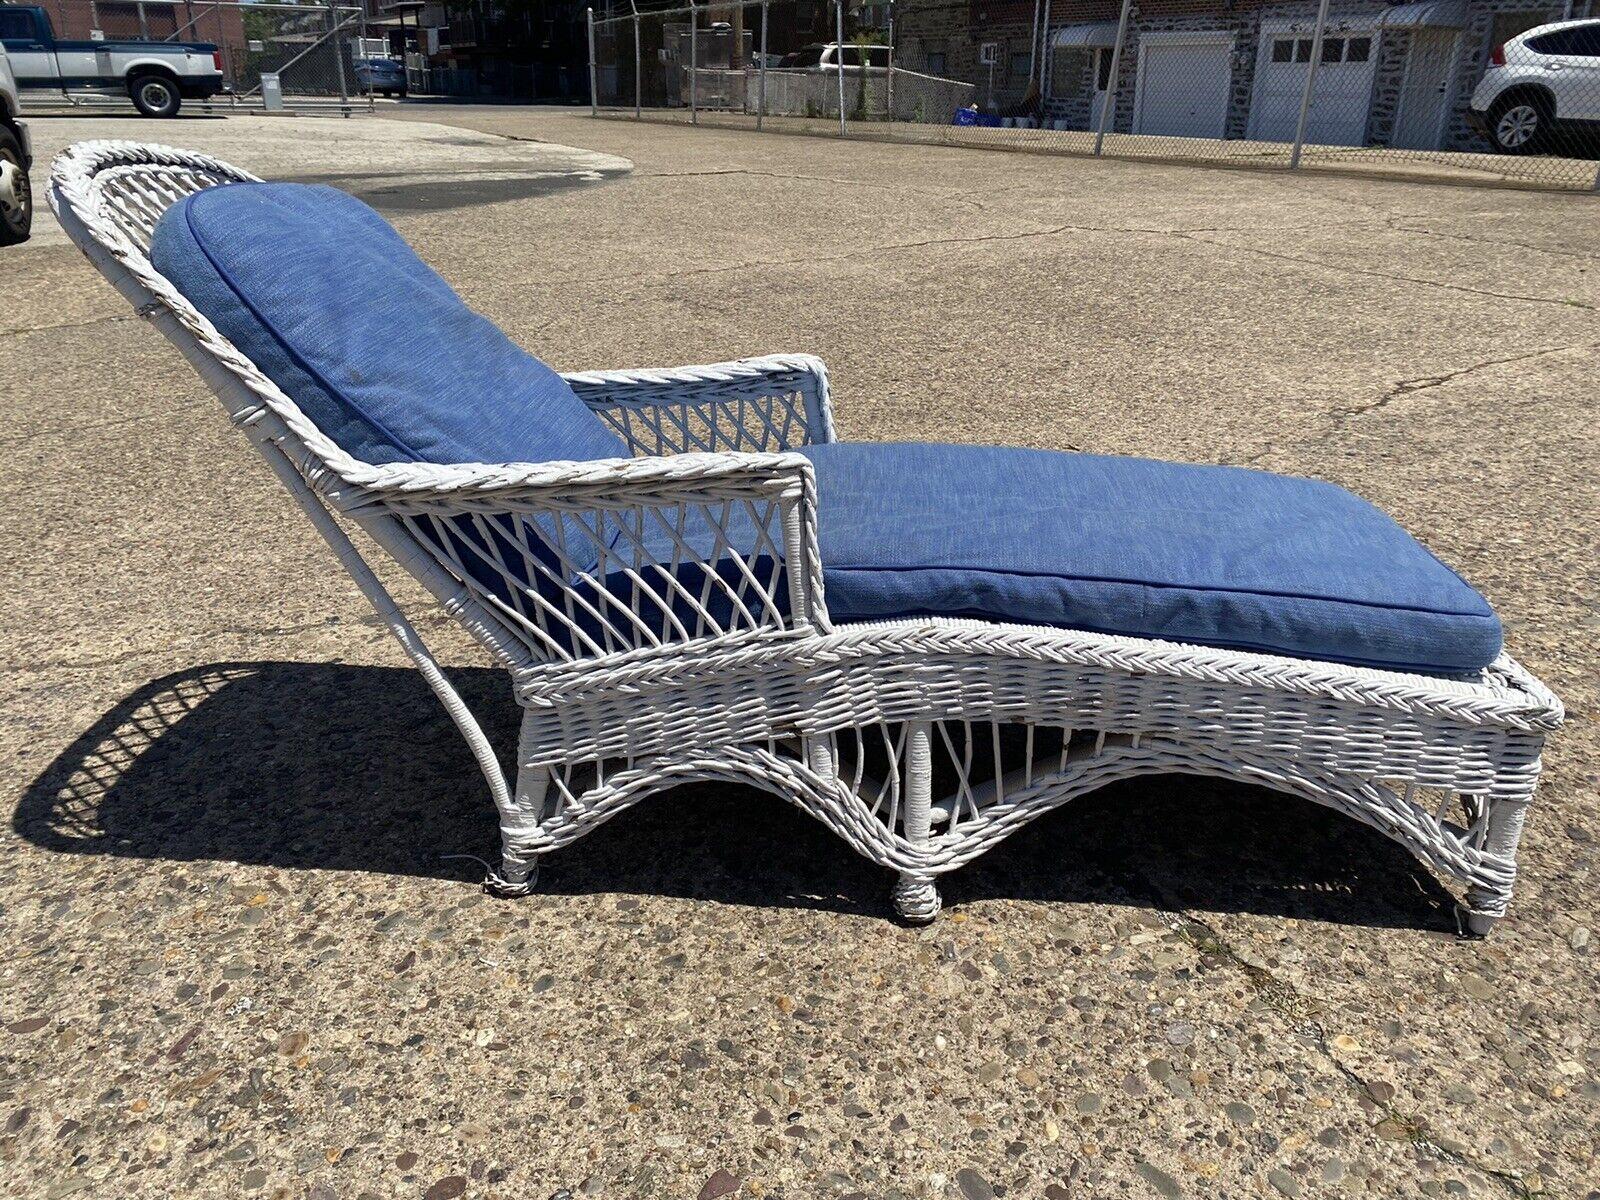 Antique American Victorianwhite wicker sunroom chaise lounge arm chair sofa. Item features wicker wrapped wooden frame, blue cushions, very nice antique item, great style and form. Circa early to Mid 20th Century. Measurements: 34.5